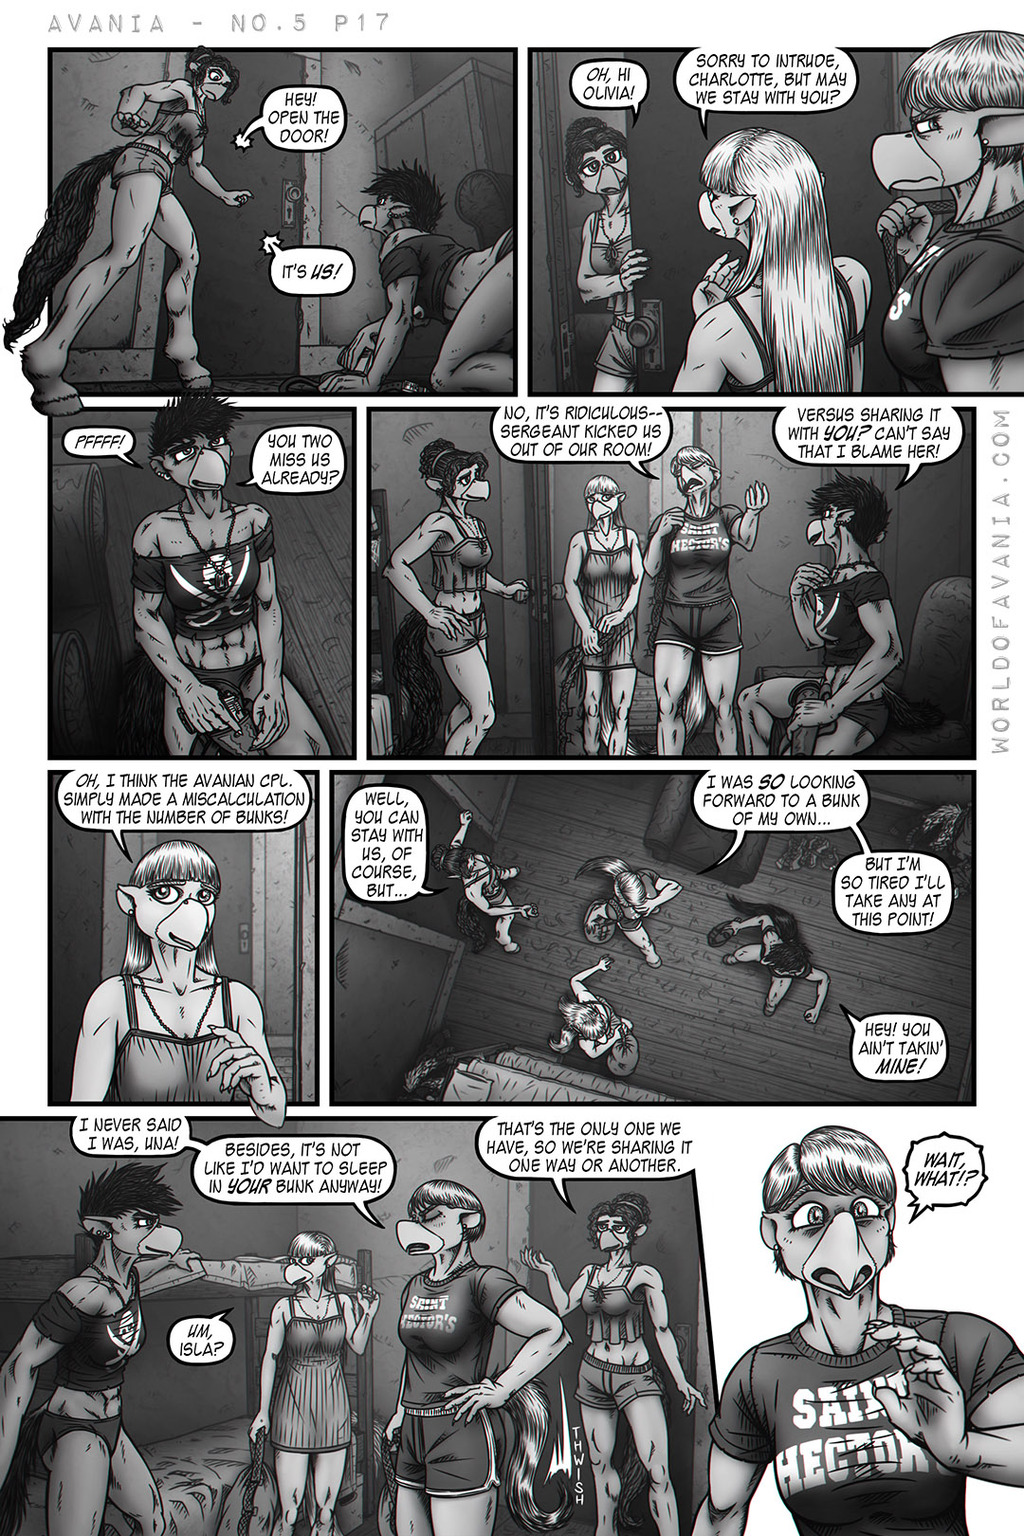 Avania Comic - Issue No.5, Page 17